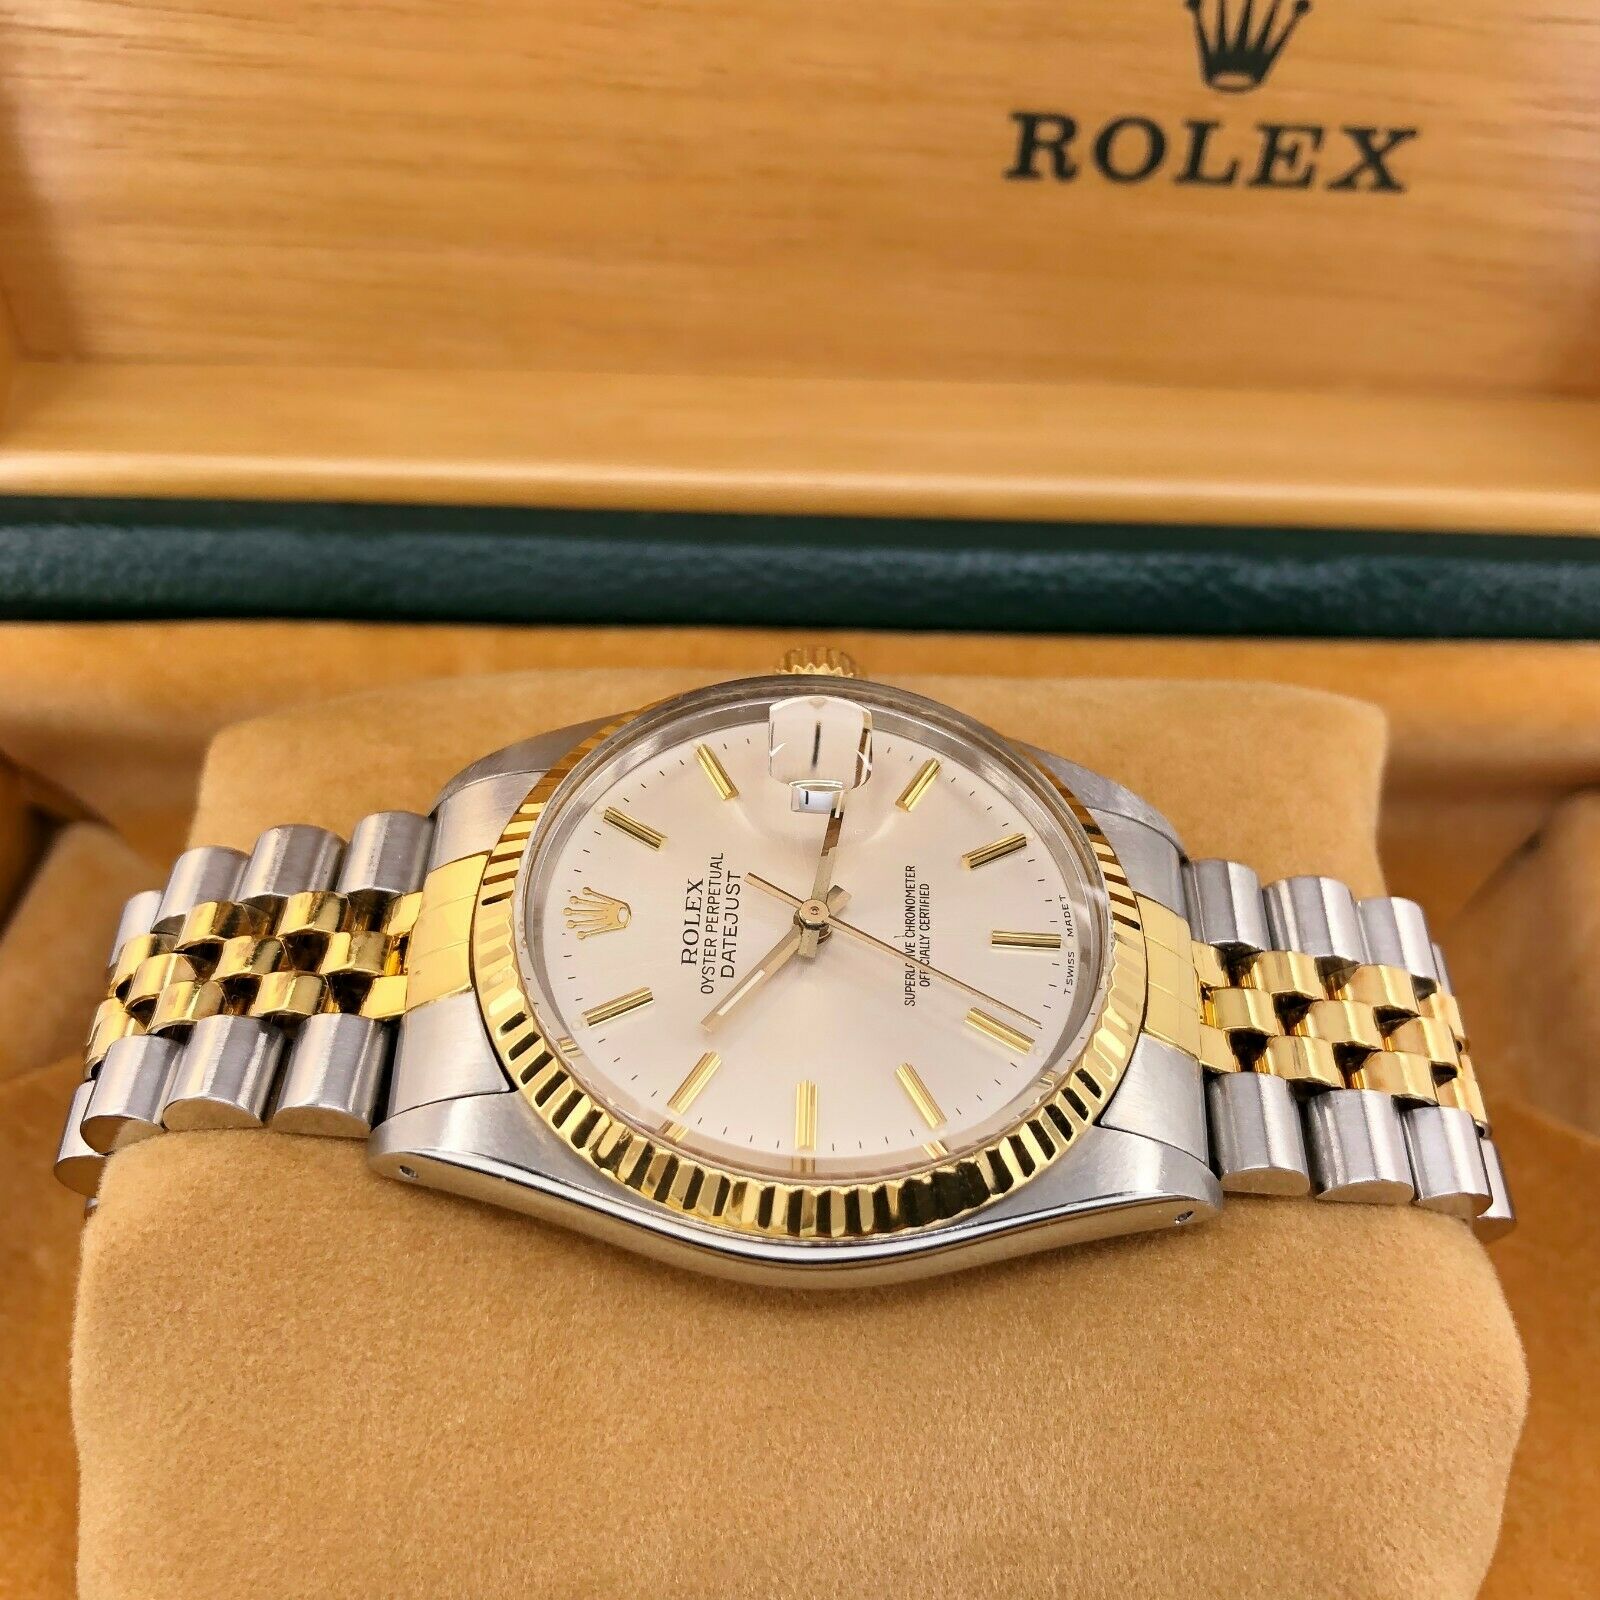 Rolex 36mm Datejust Watch 18K Yellow Gold Stainless Steel Ref 16013 Box & Papers